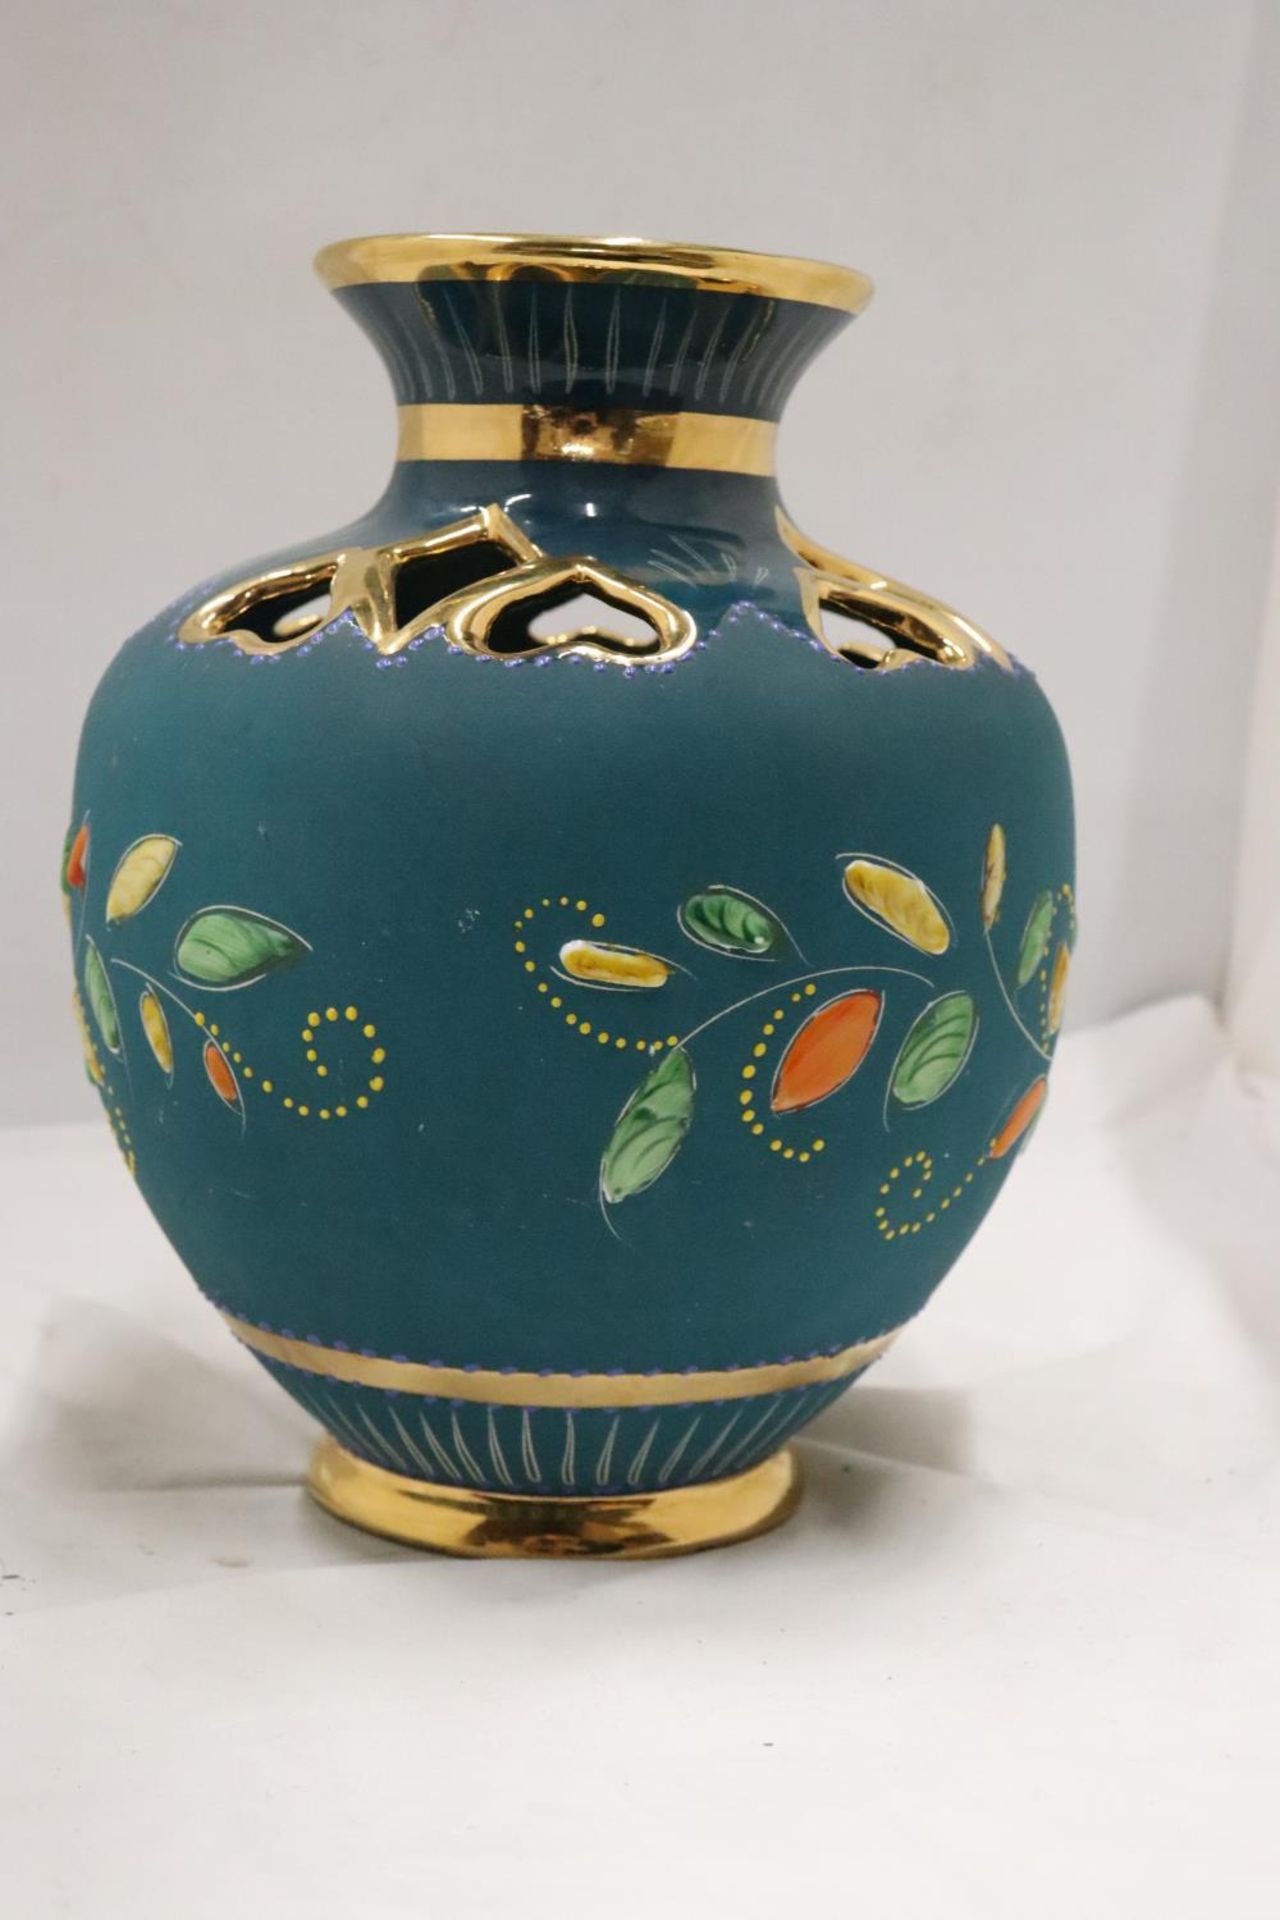 A CONTINENTAL TEAL BLUE VASE WITH THE MARK HB, QUAREGNON, BELGIUM TO THE BASE - Image 4 of 6